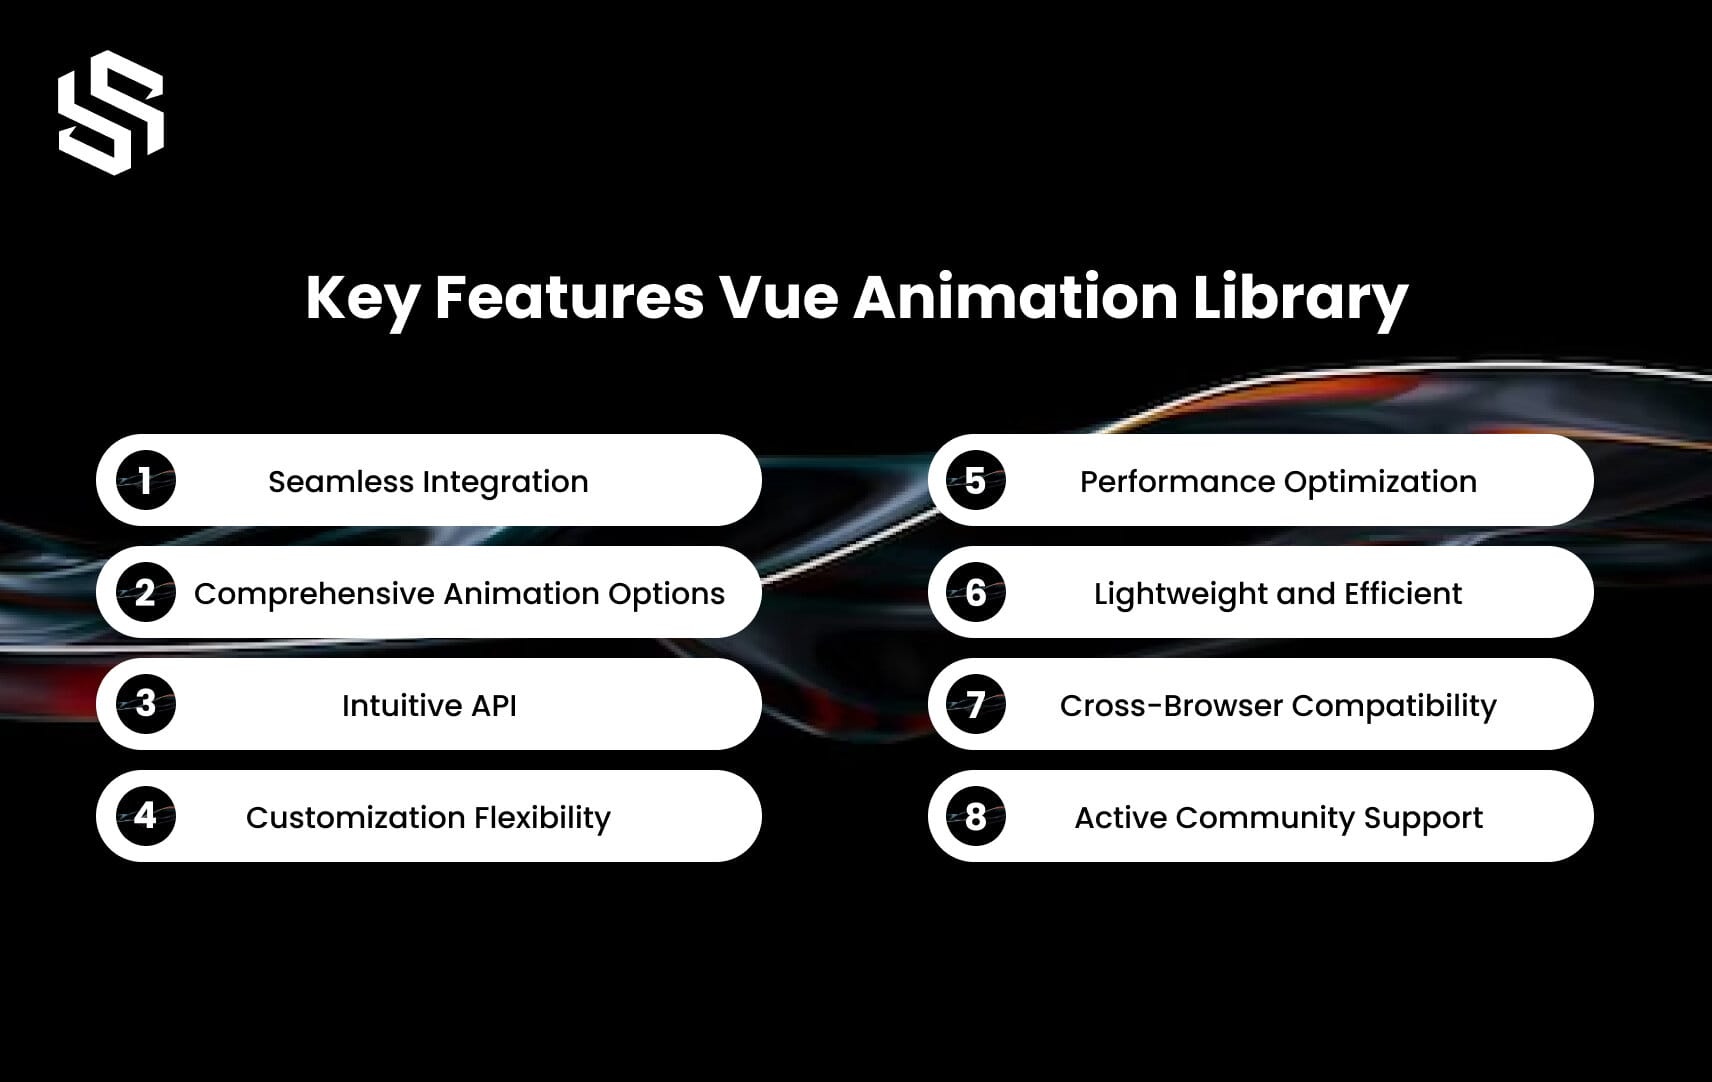 Key Features Vue Animation Library